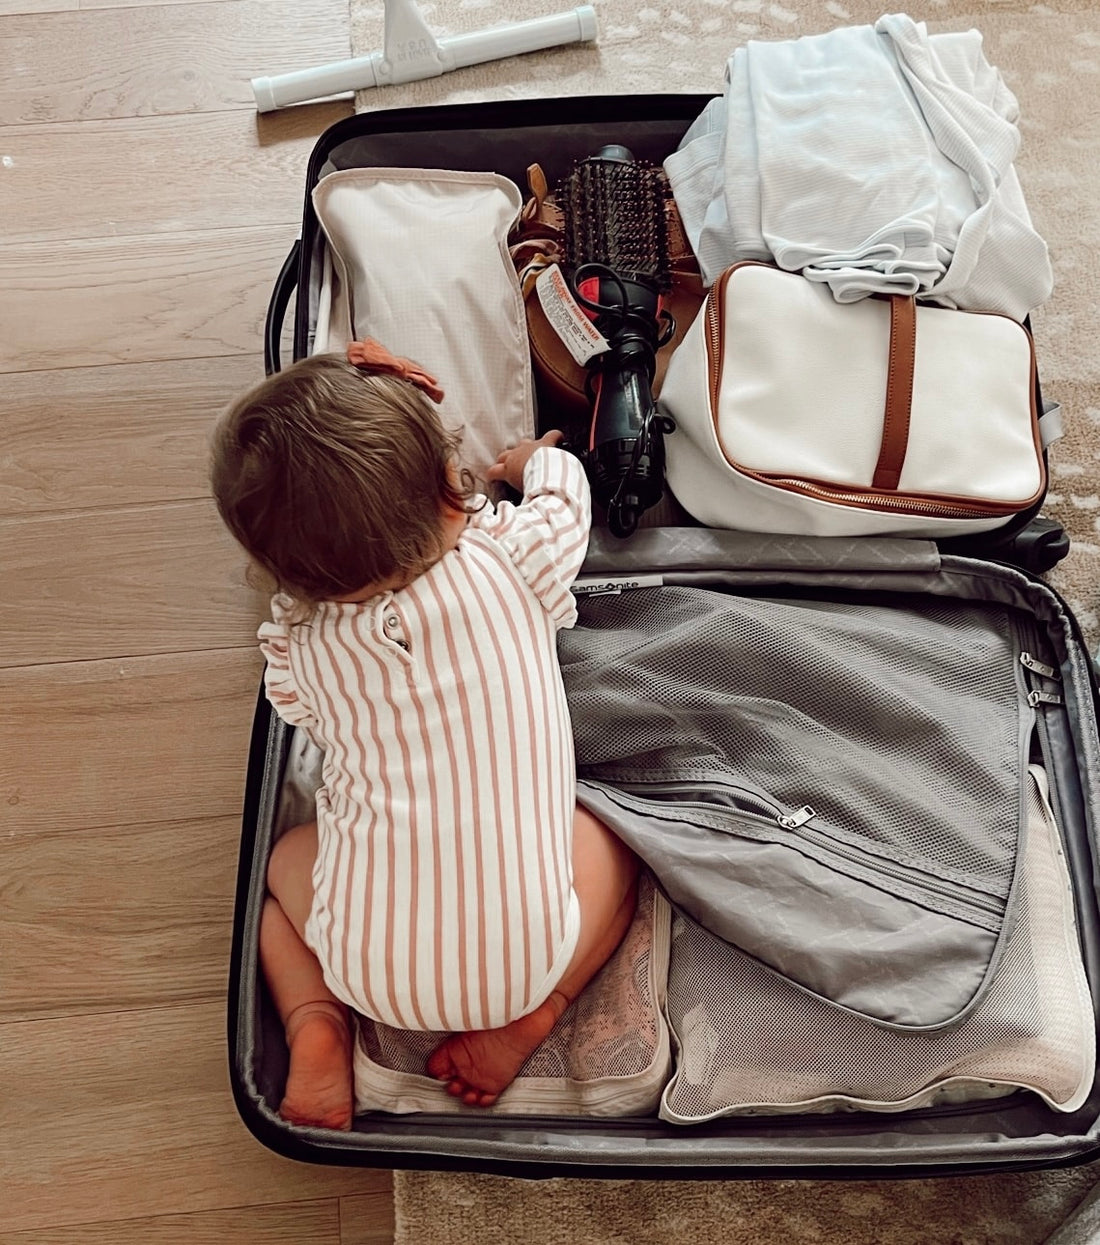 TRAVELING WITH TODDLERS